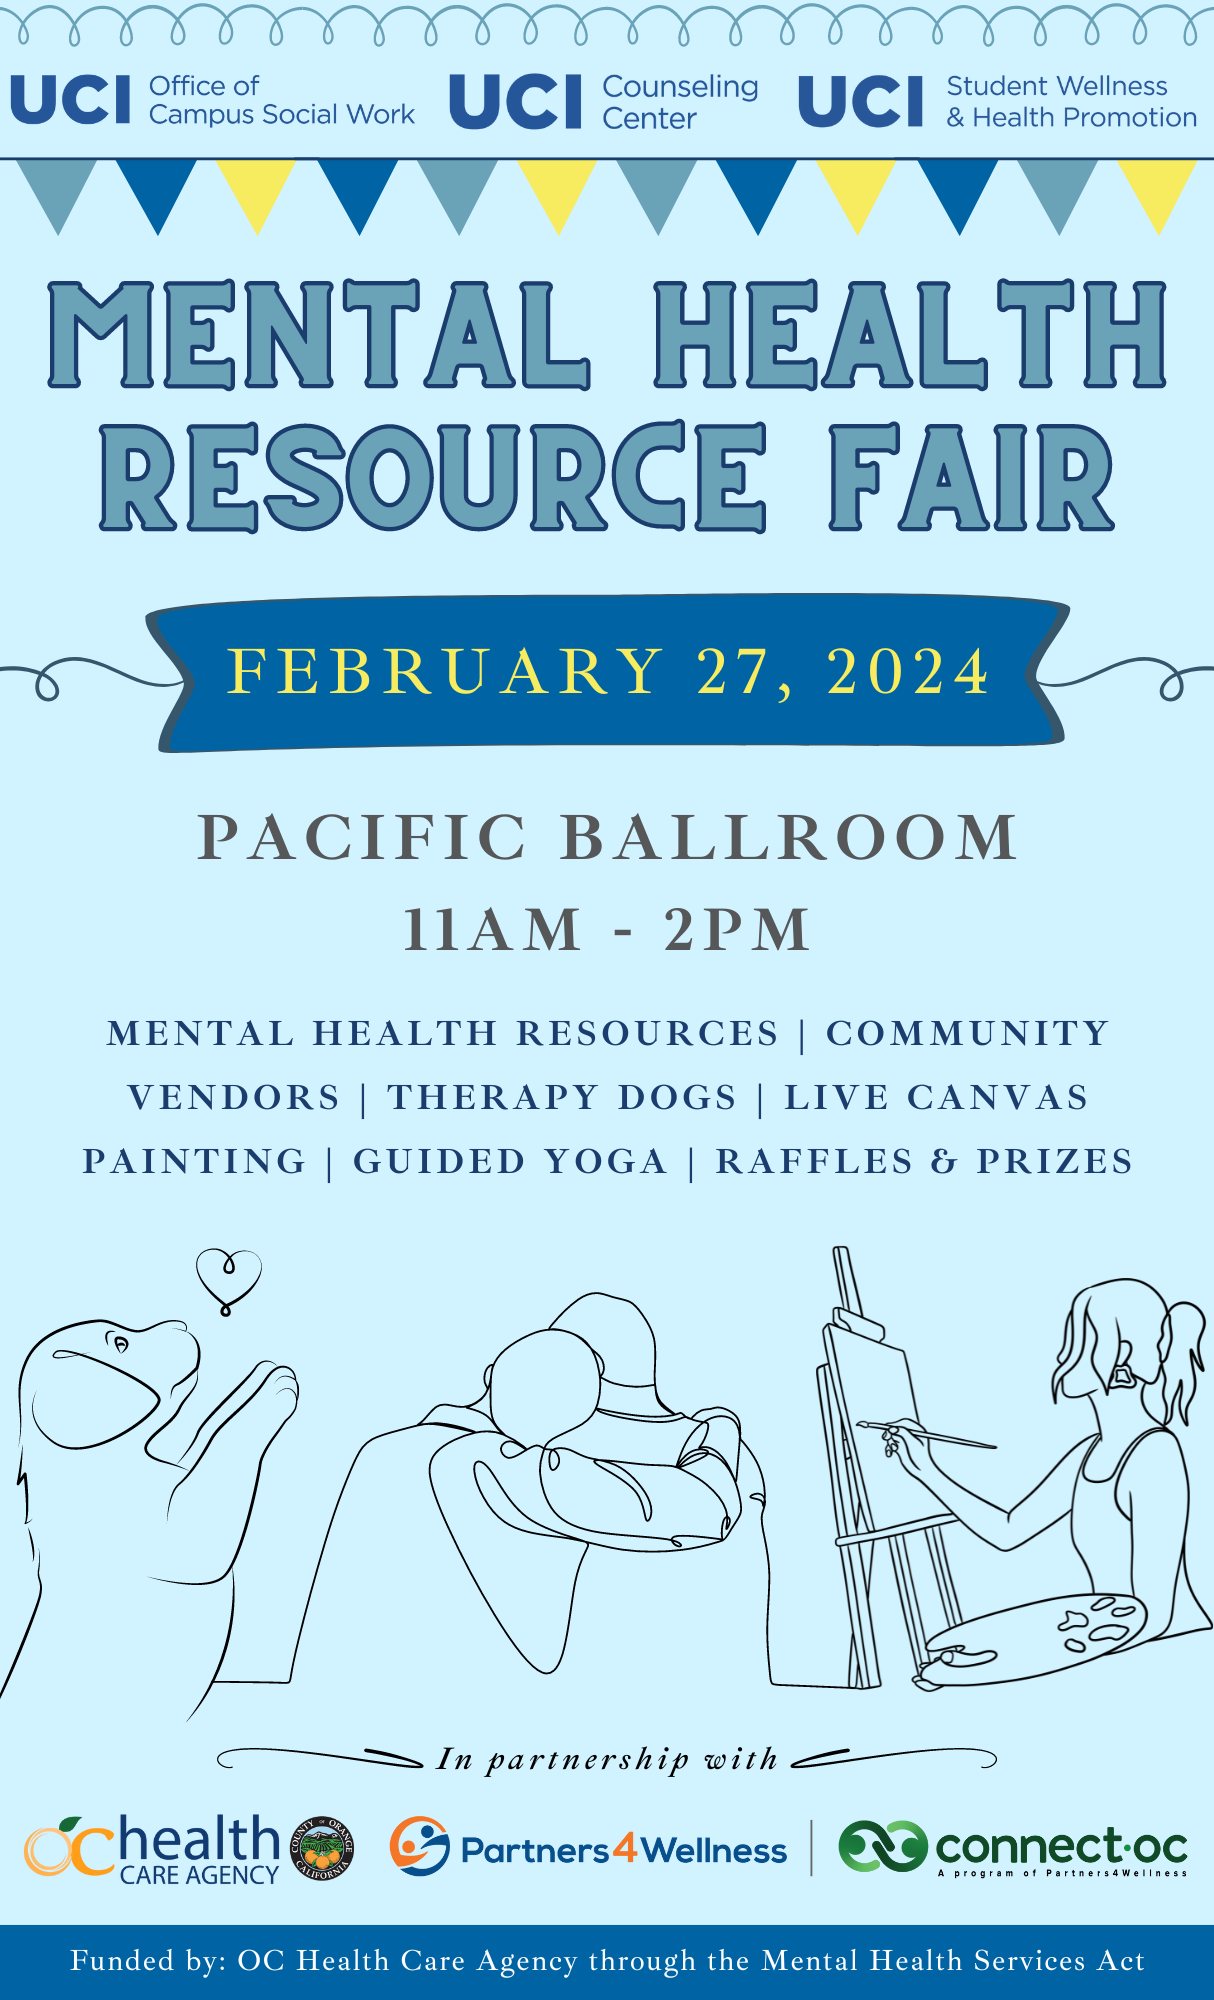 Mental Health Resource Fair February 27, 2024 Pacific Ballroom 11 AM - 2 PM mental health resources | community vendors | therapy dogs | LIVE CANVAS PAINTING | Guided yoga | raffles & prizes In partnership with: OC Health Care Agency, Partners 4 Wellness, Connect OC Funded by: OC Health Care Agency through the Mental Health Services Act